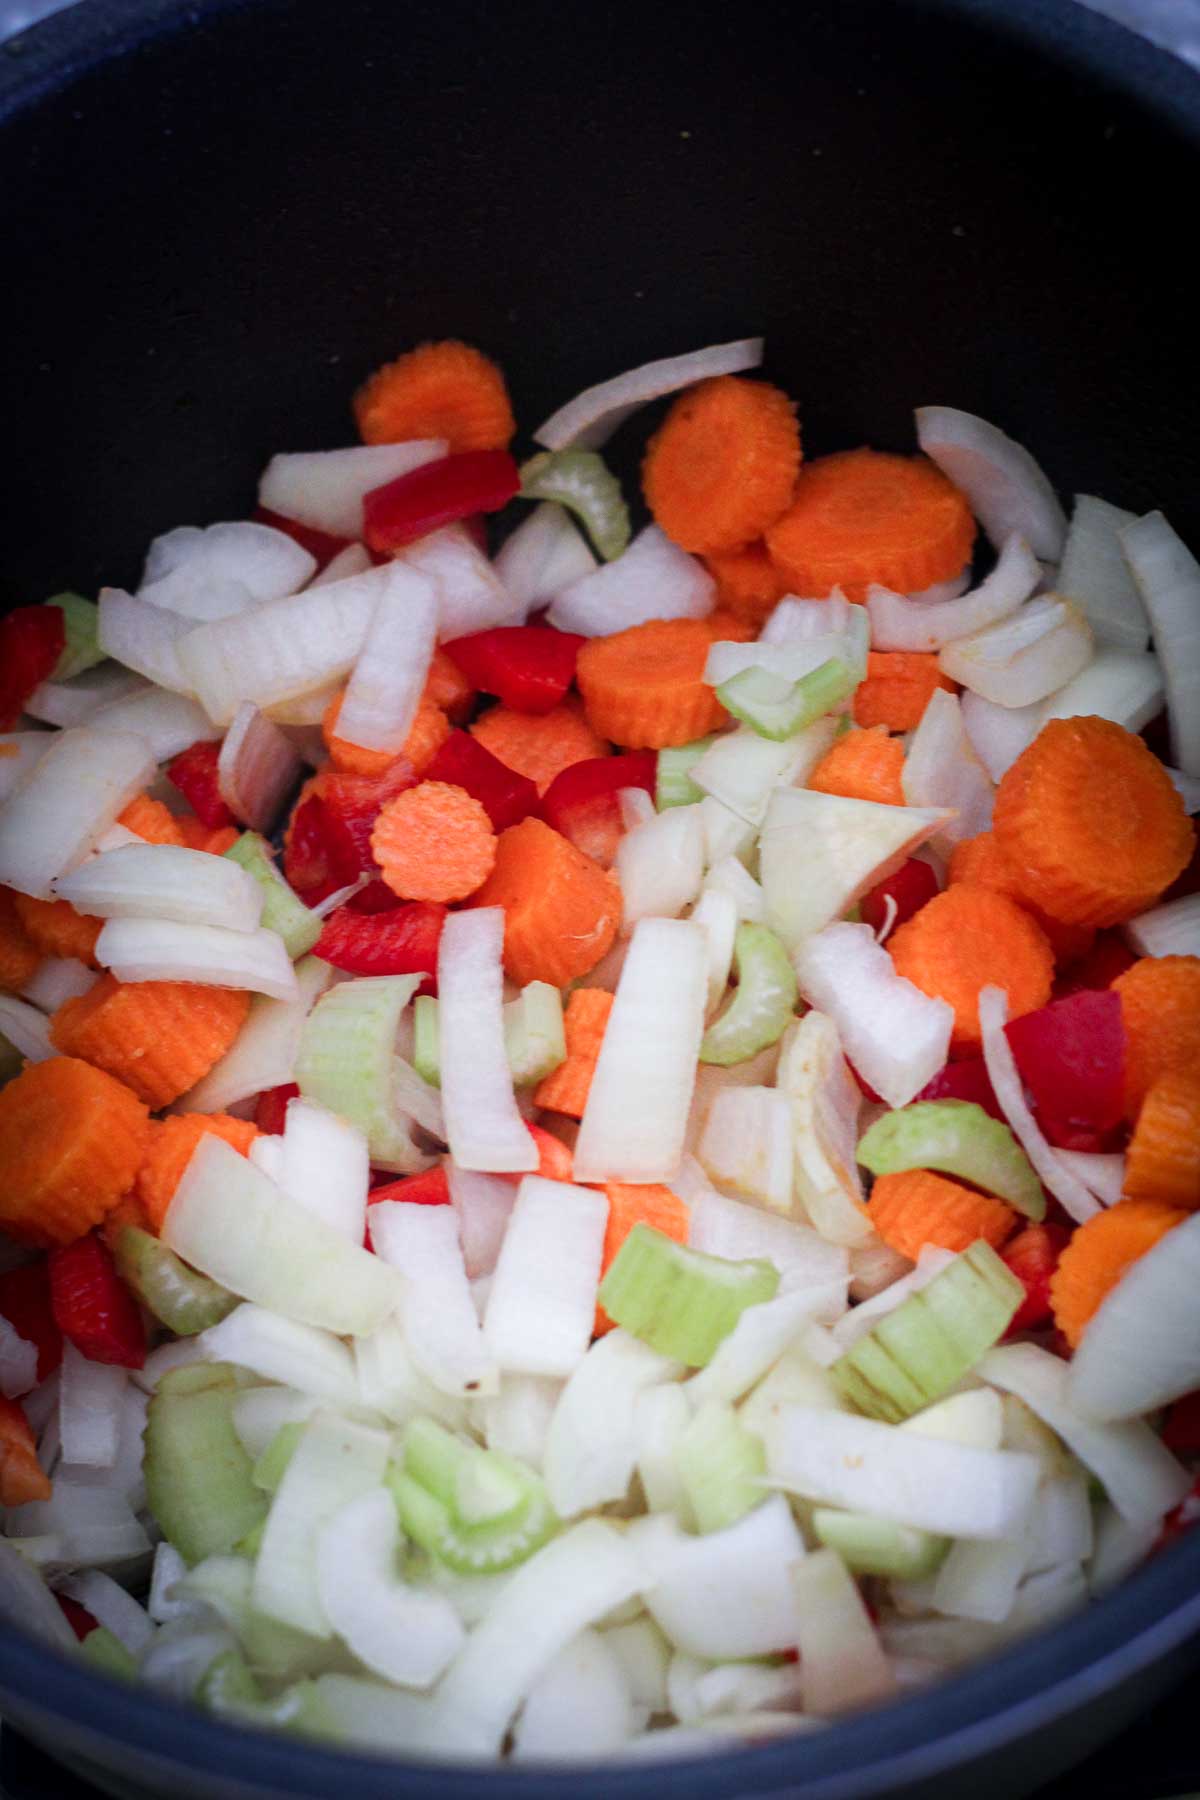 Sauteing the veggies in the pressure cooker.